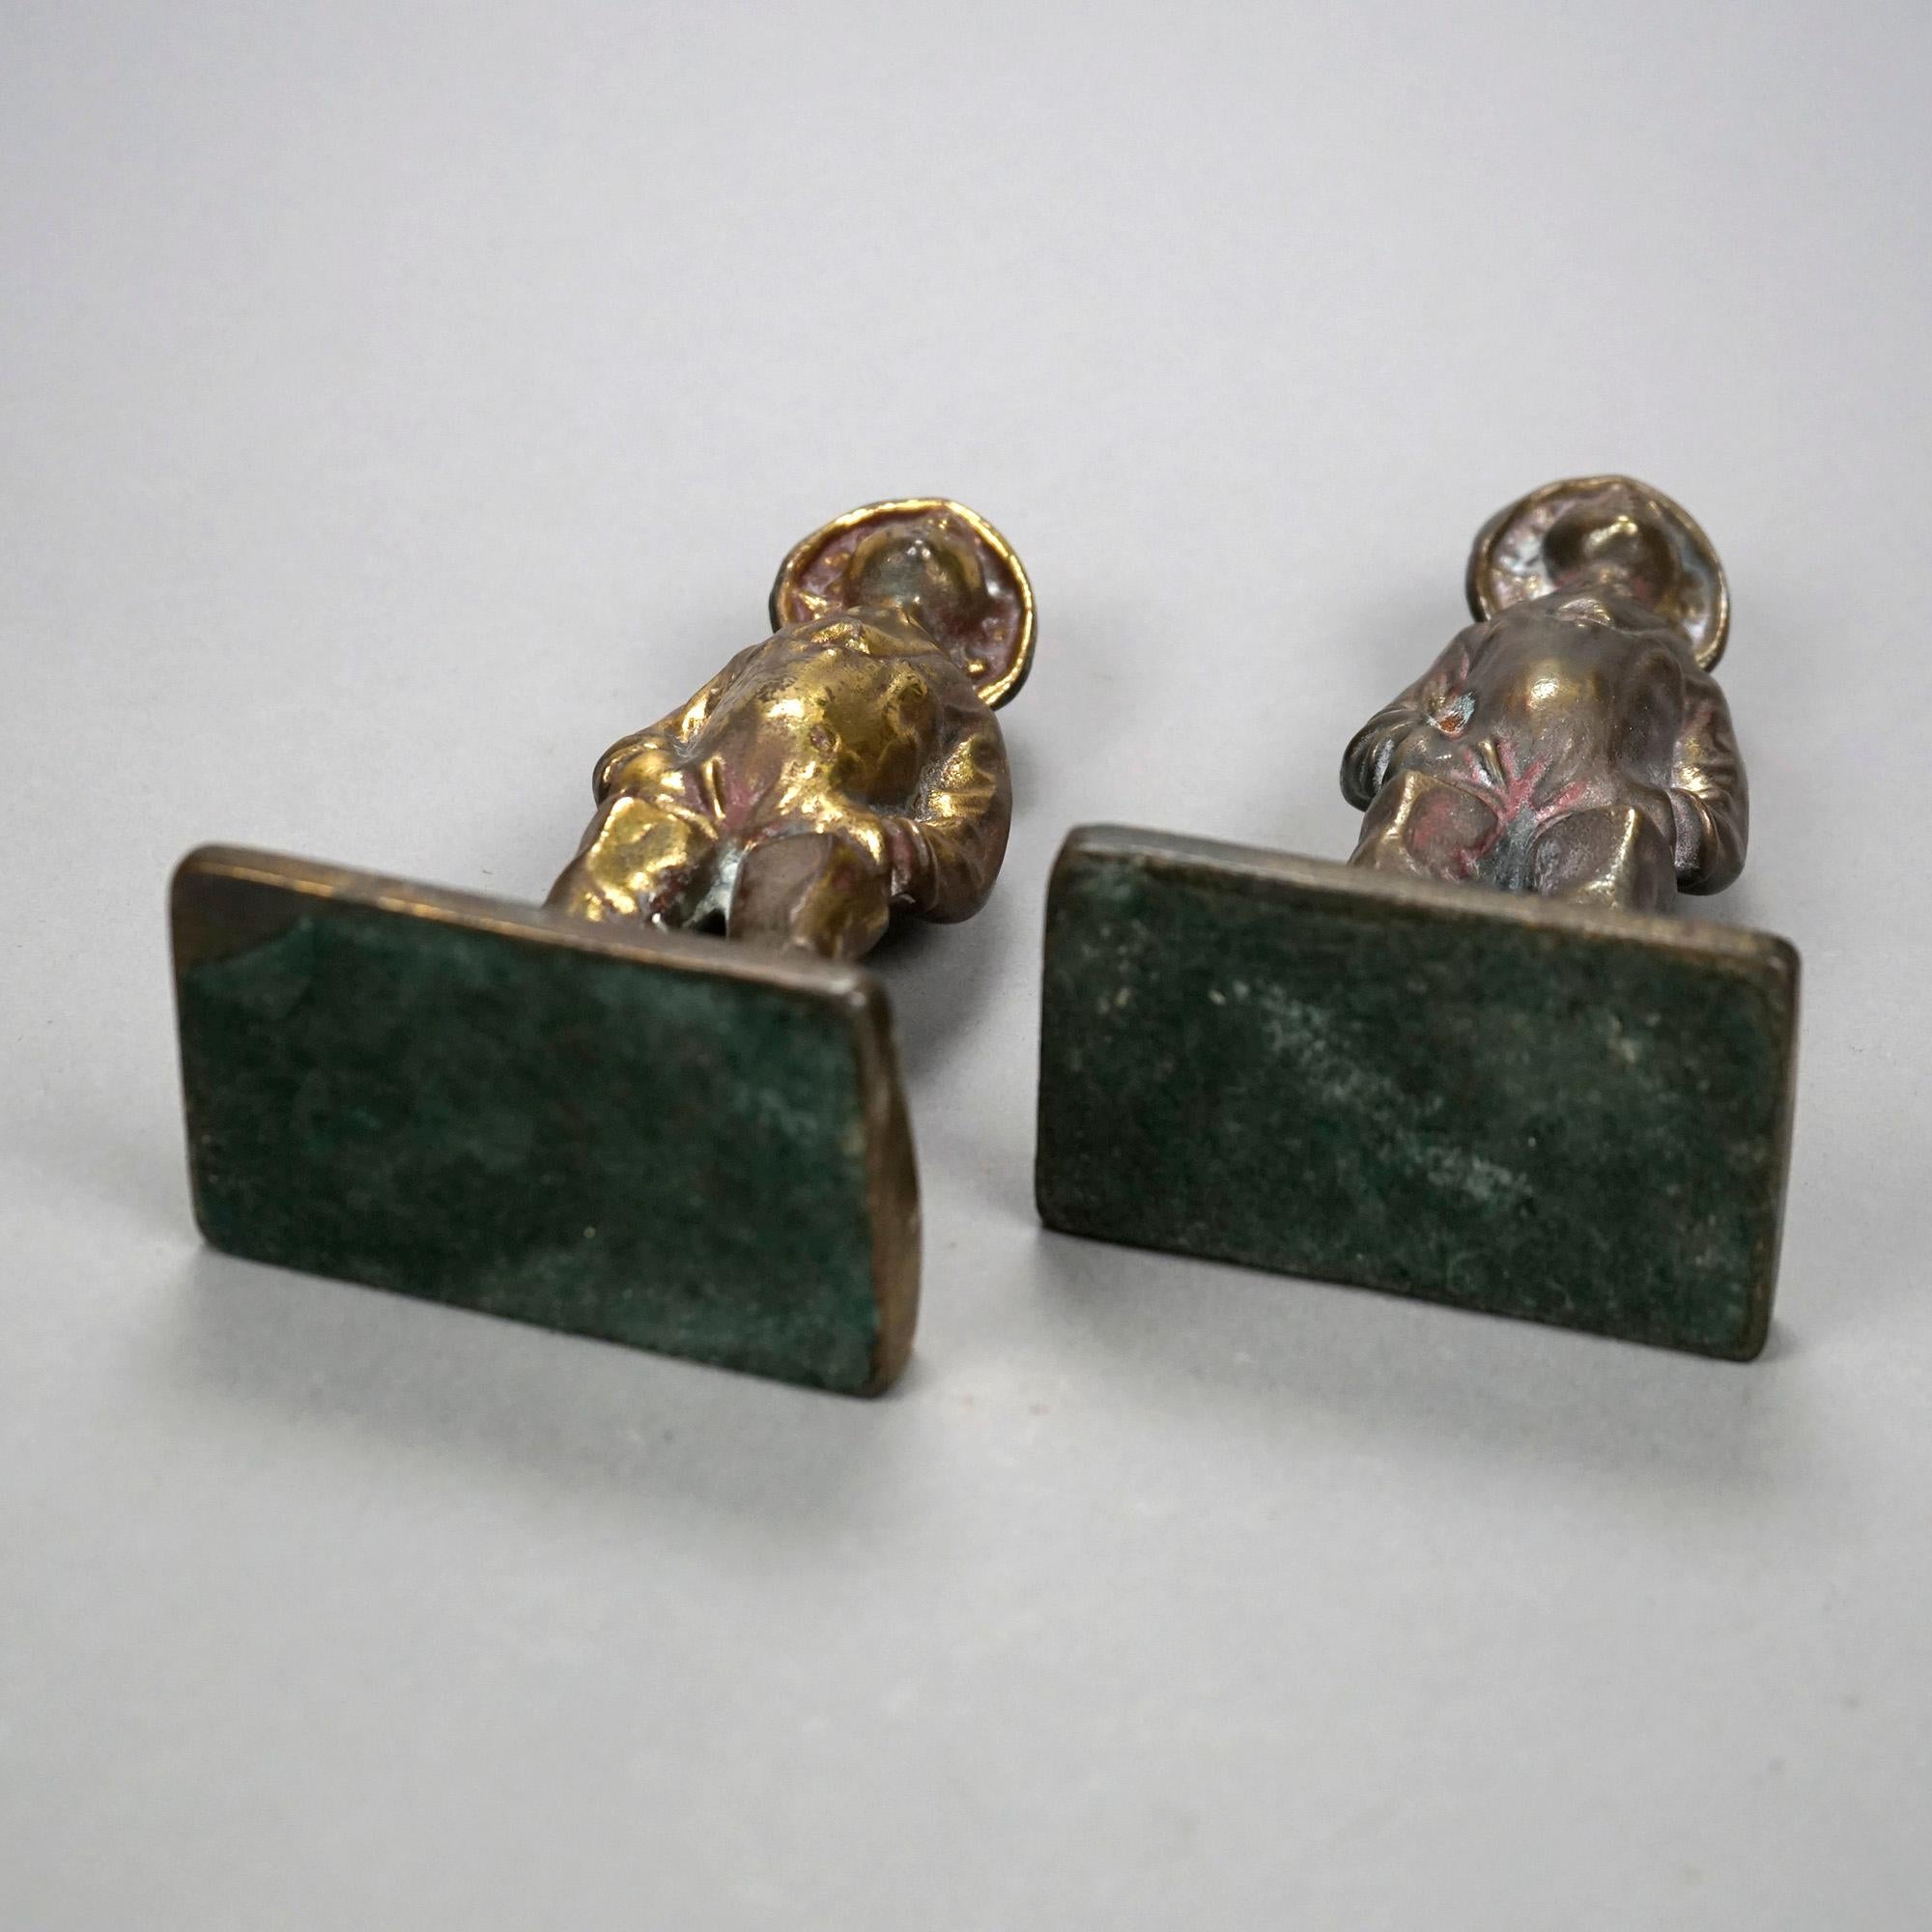 Antique Pair Bronzed Bookends, Young Boy, Circa 1920 For Sale 8